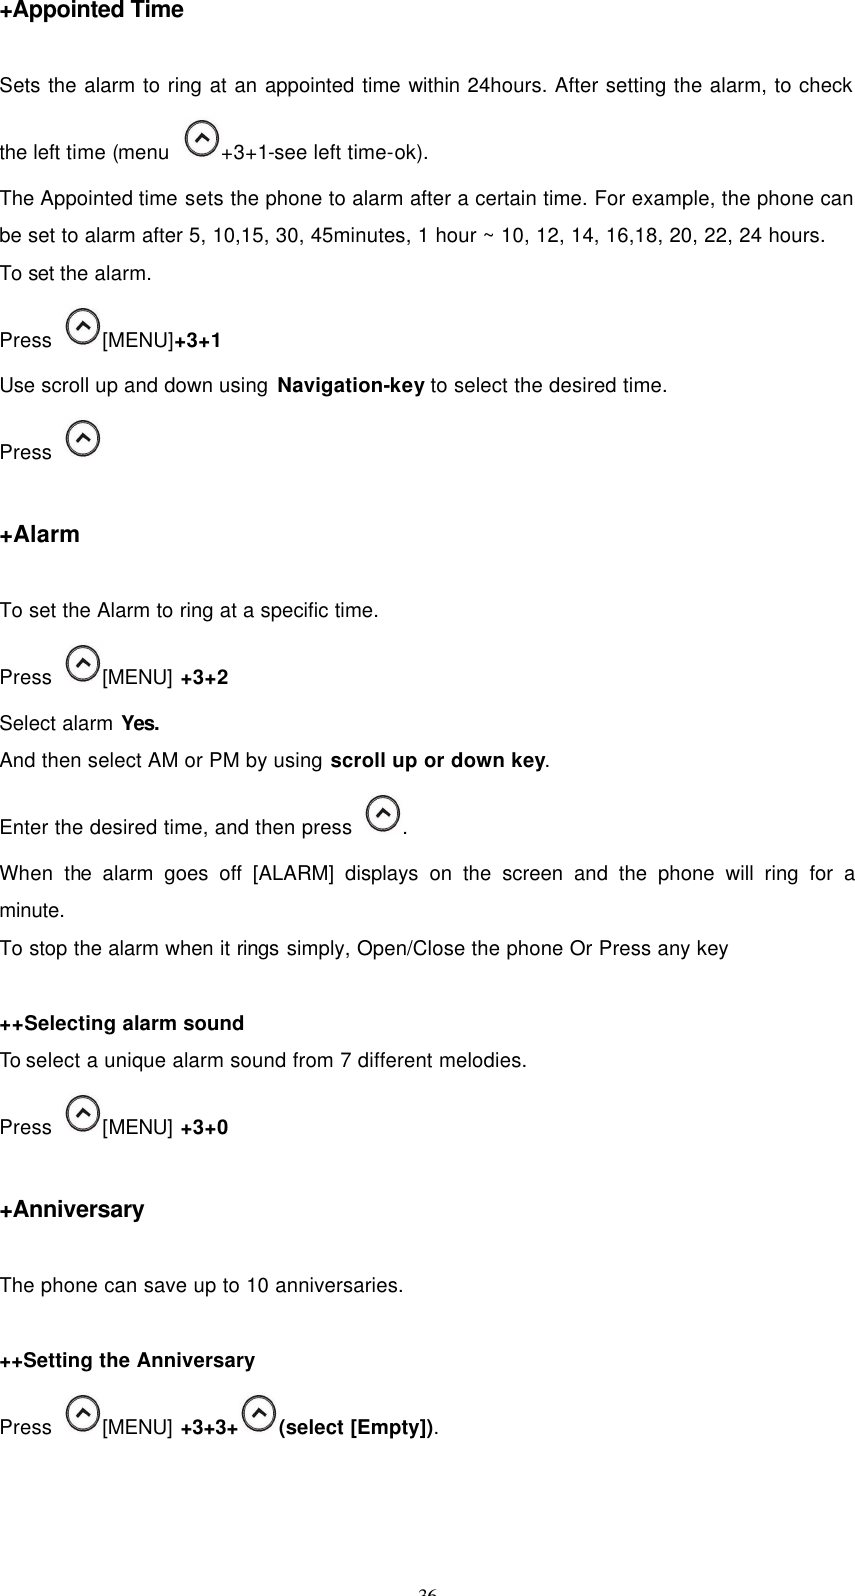 36 +Appointed Time  Sets the alarm to ring at an appointed time within 24hours. After setting the alarm, to check the left time (menu   +3+1-see left time-ok).   The Appointed time sets the phone to alarm after a certain time. For example, the phone can be set to alarm after 5, 10,15, 30, 45minutes, 1 hour ~ 10, 12, 14, 16,18, 20, 22, 24 hours. To set the alarm. Press   [MENU]+3+1 Use scroll up and down using Navigation-key to select the desired time.   Press     +Alarm  To set the Alarm to ring at a specific time. Press  [MENU] +3+2 Select alarm Yes. And then select AM or PM by using scroll up or down key. Enter the desired time, and then press   . When the alarm goes off [ALARM] displays on the screen and the phone will ring for a minute. To stop the alarm when it rings simply, Open/Close the phone Or Press any key  ++Selecting alarm sound To select a unique alarm sound from 7 different melodies. Press   [MENU] +3+0  +Anniversary    The phone can save up to 10 anniversaries.  ++Setting the Anniversary Press   [MENU] +3+3+ (select [Empty]). 